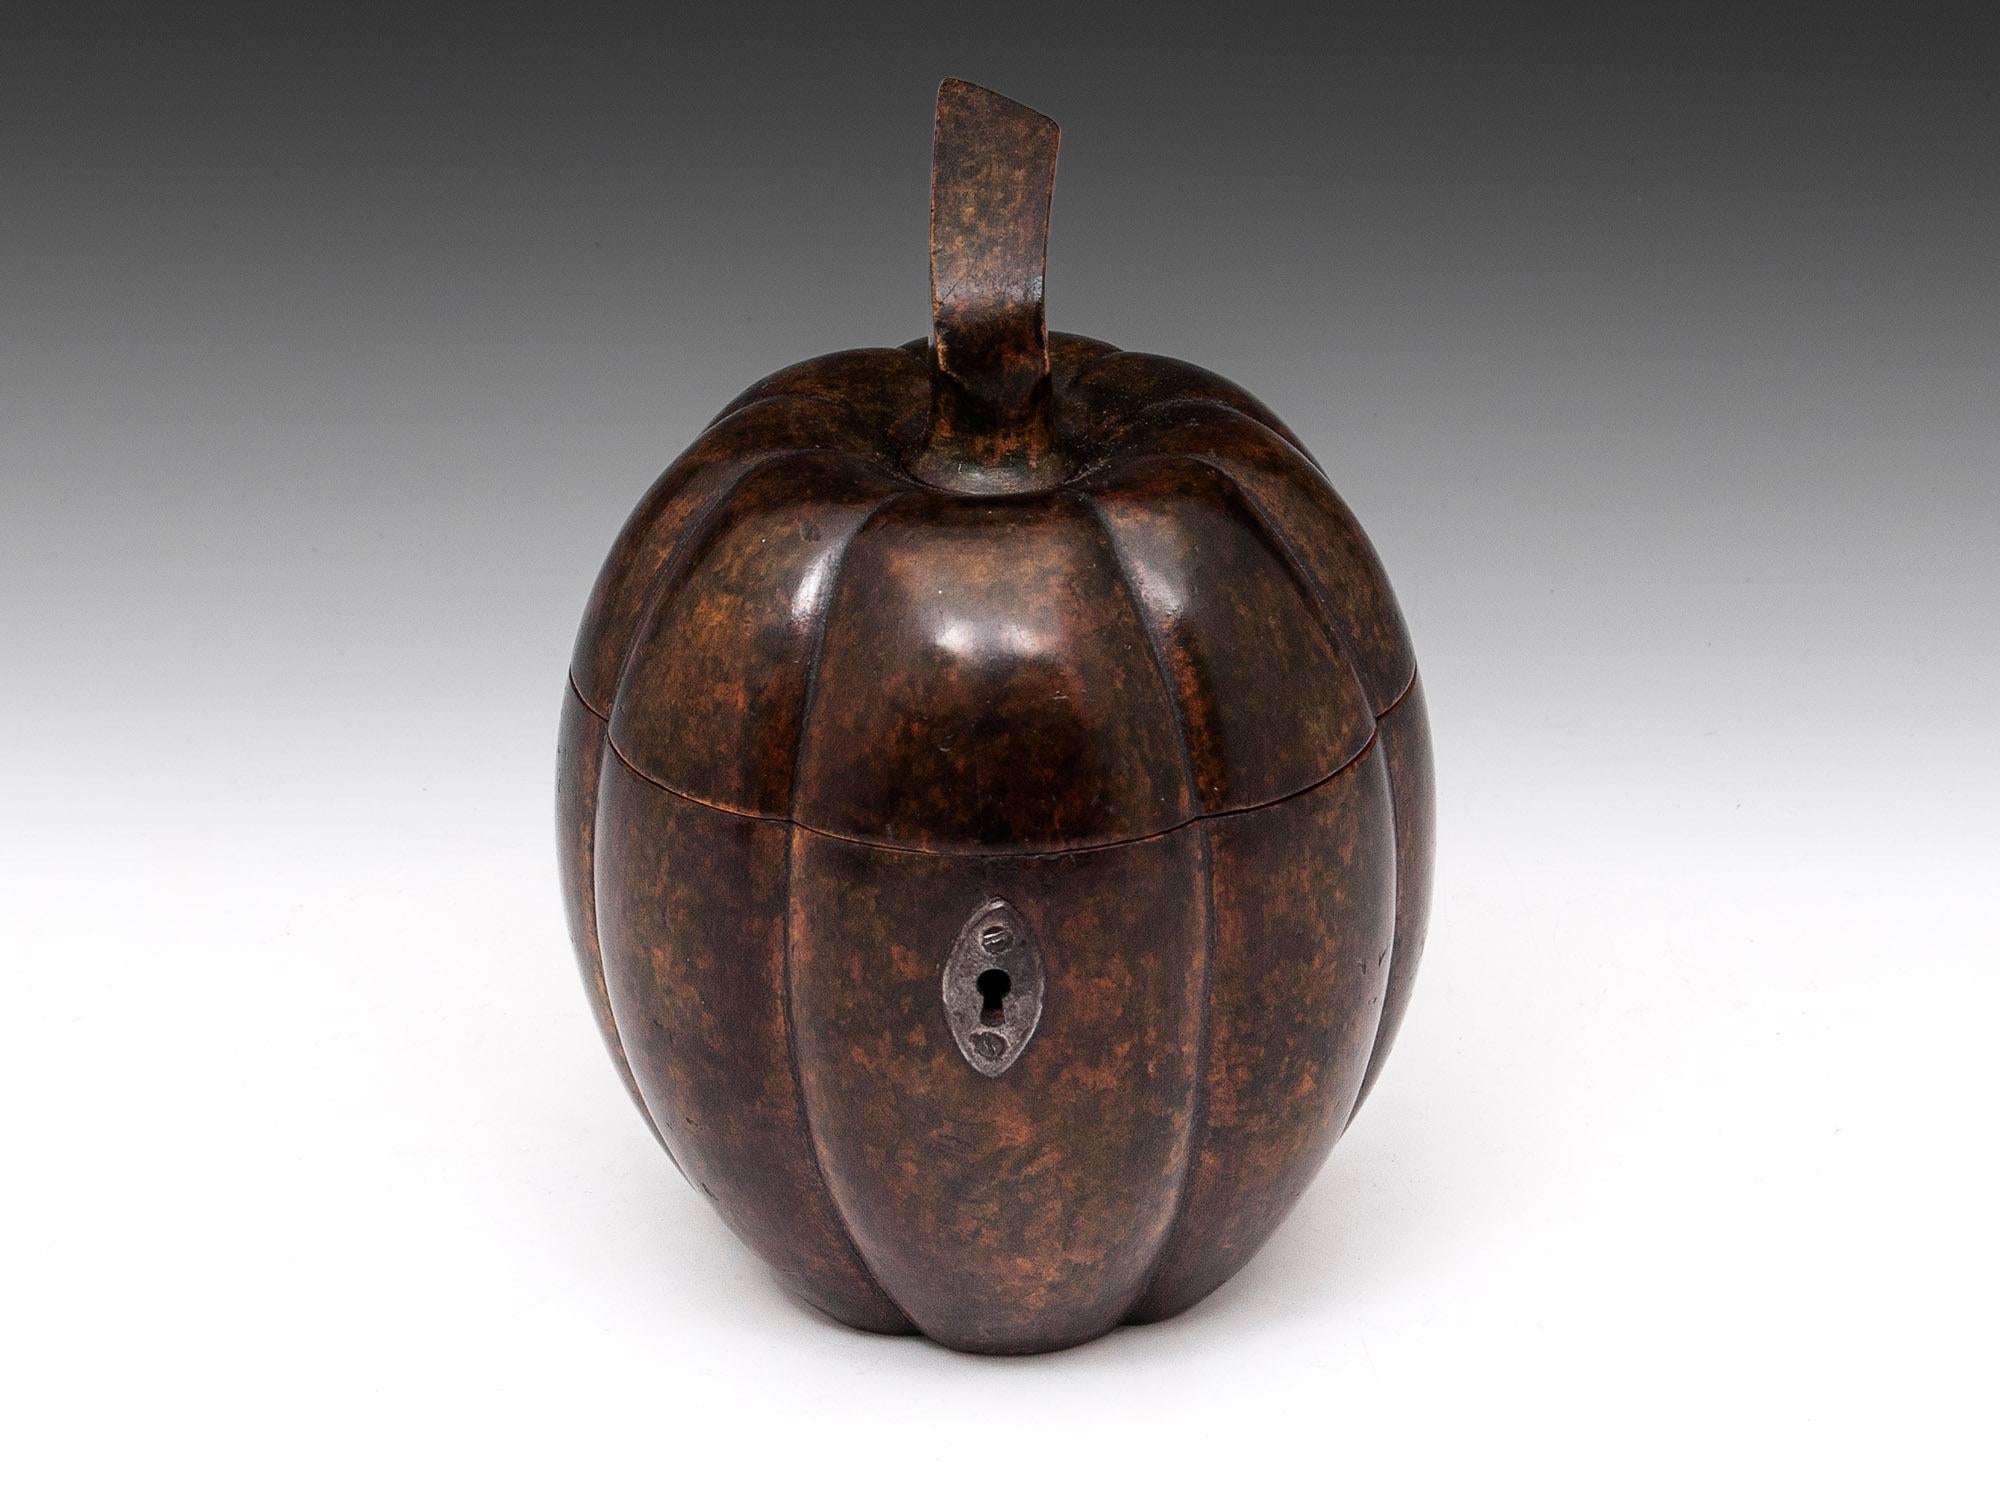 Extremely rare pumpkin / squash tea caddy with a superb dark mottled colour, lovely patination, and a wonderful original squared stalk is only seen on this type of fruit tea caddy.

The interior of this Squash Tea Caddy contains traces of its